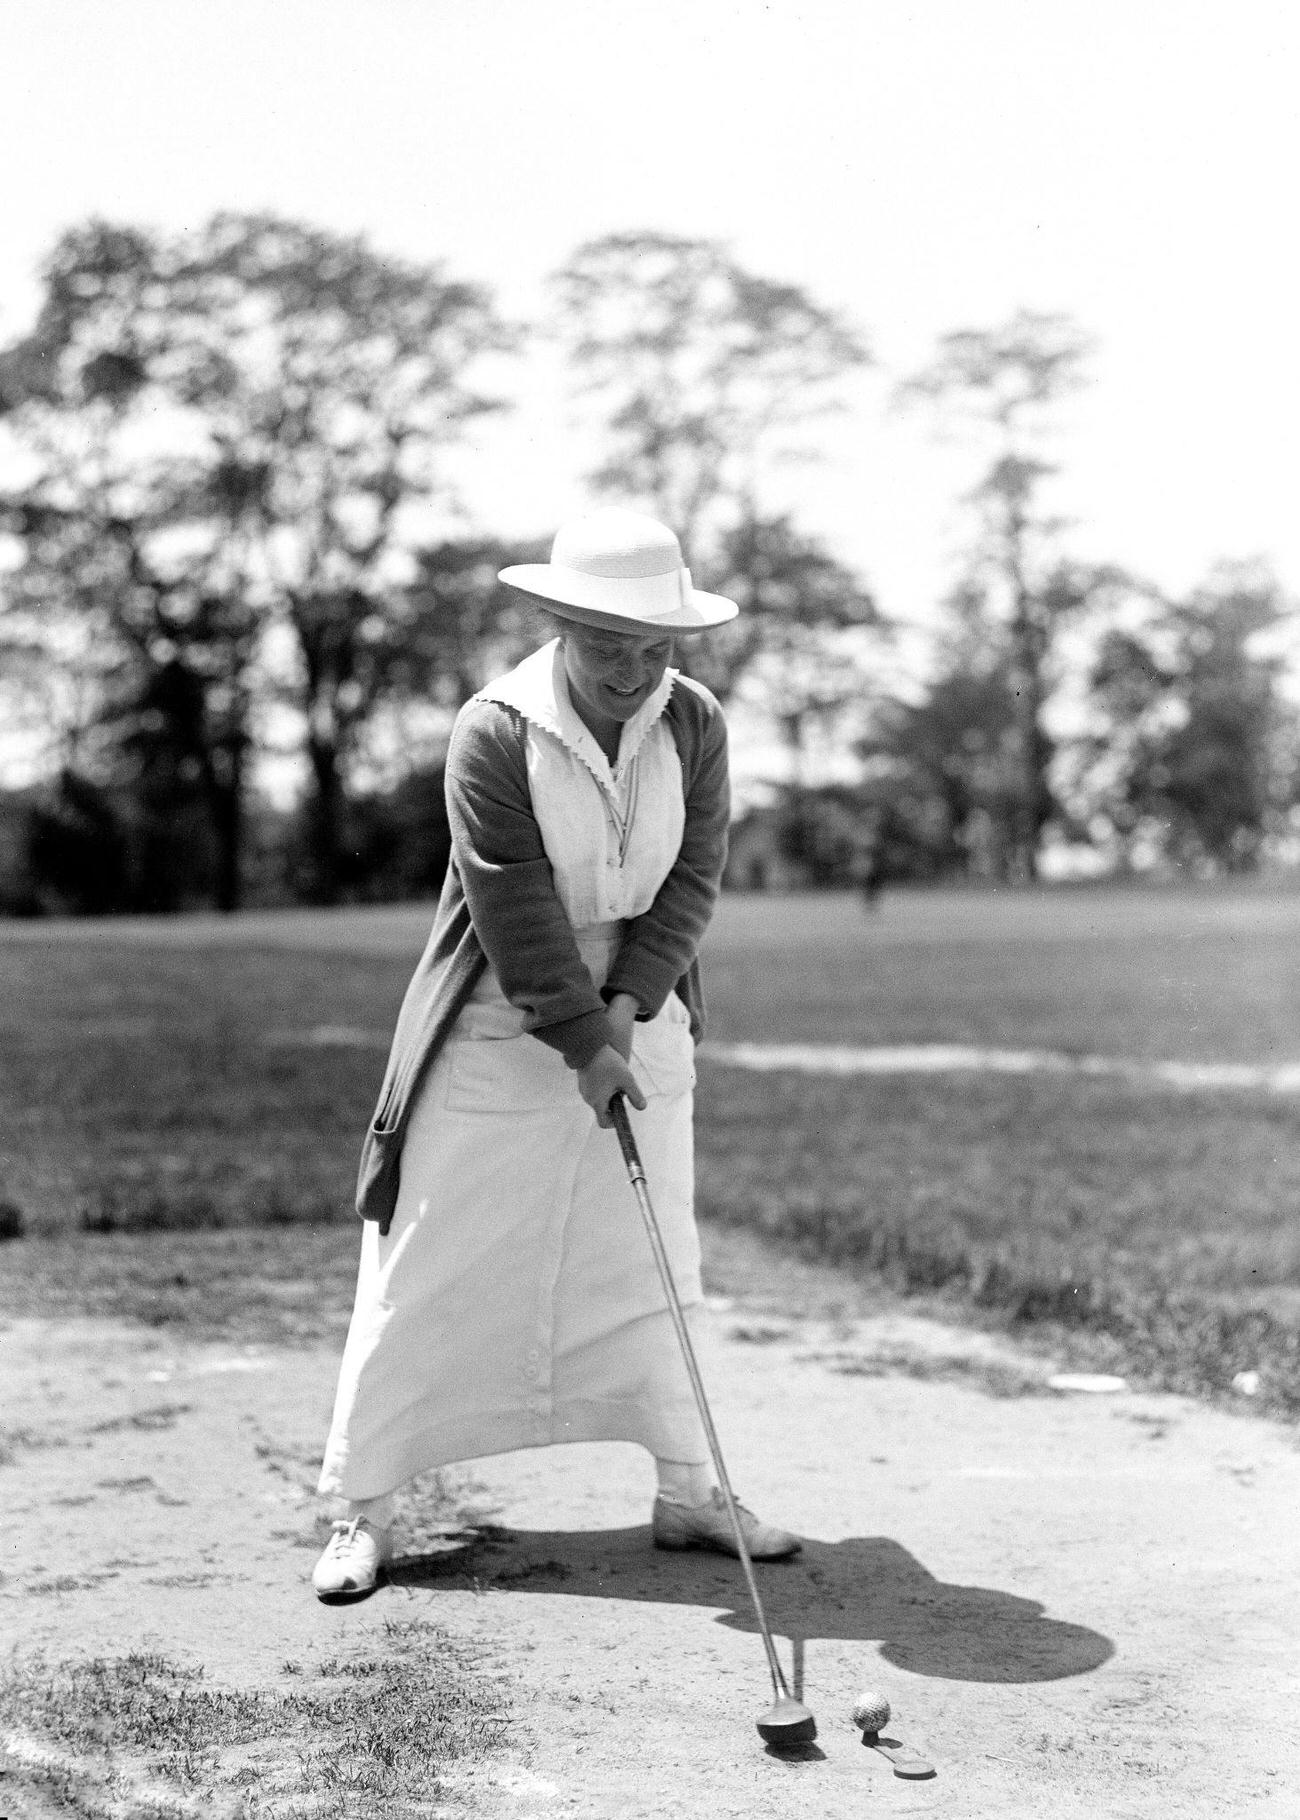 Early 1900s woman hitting golf ball from sand trap, ca. 1913-1917.